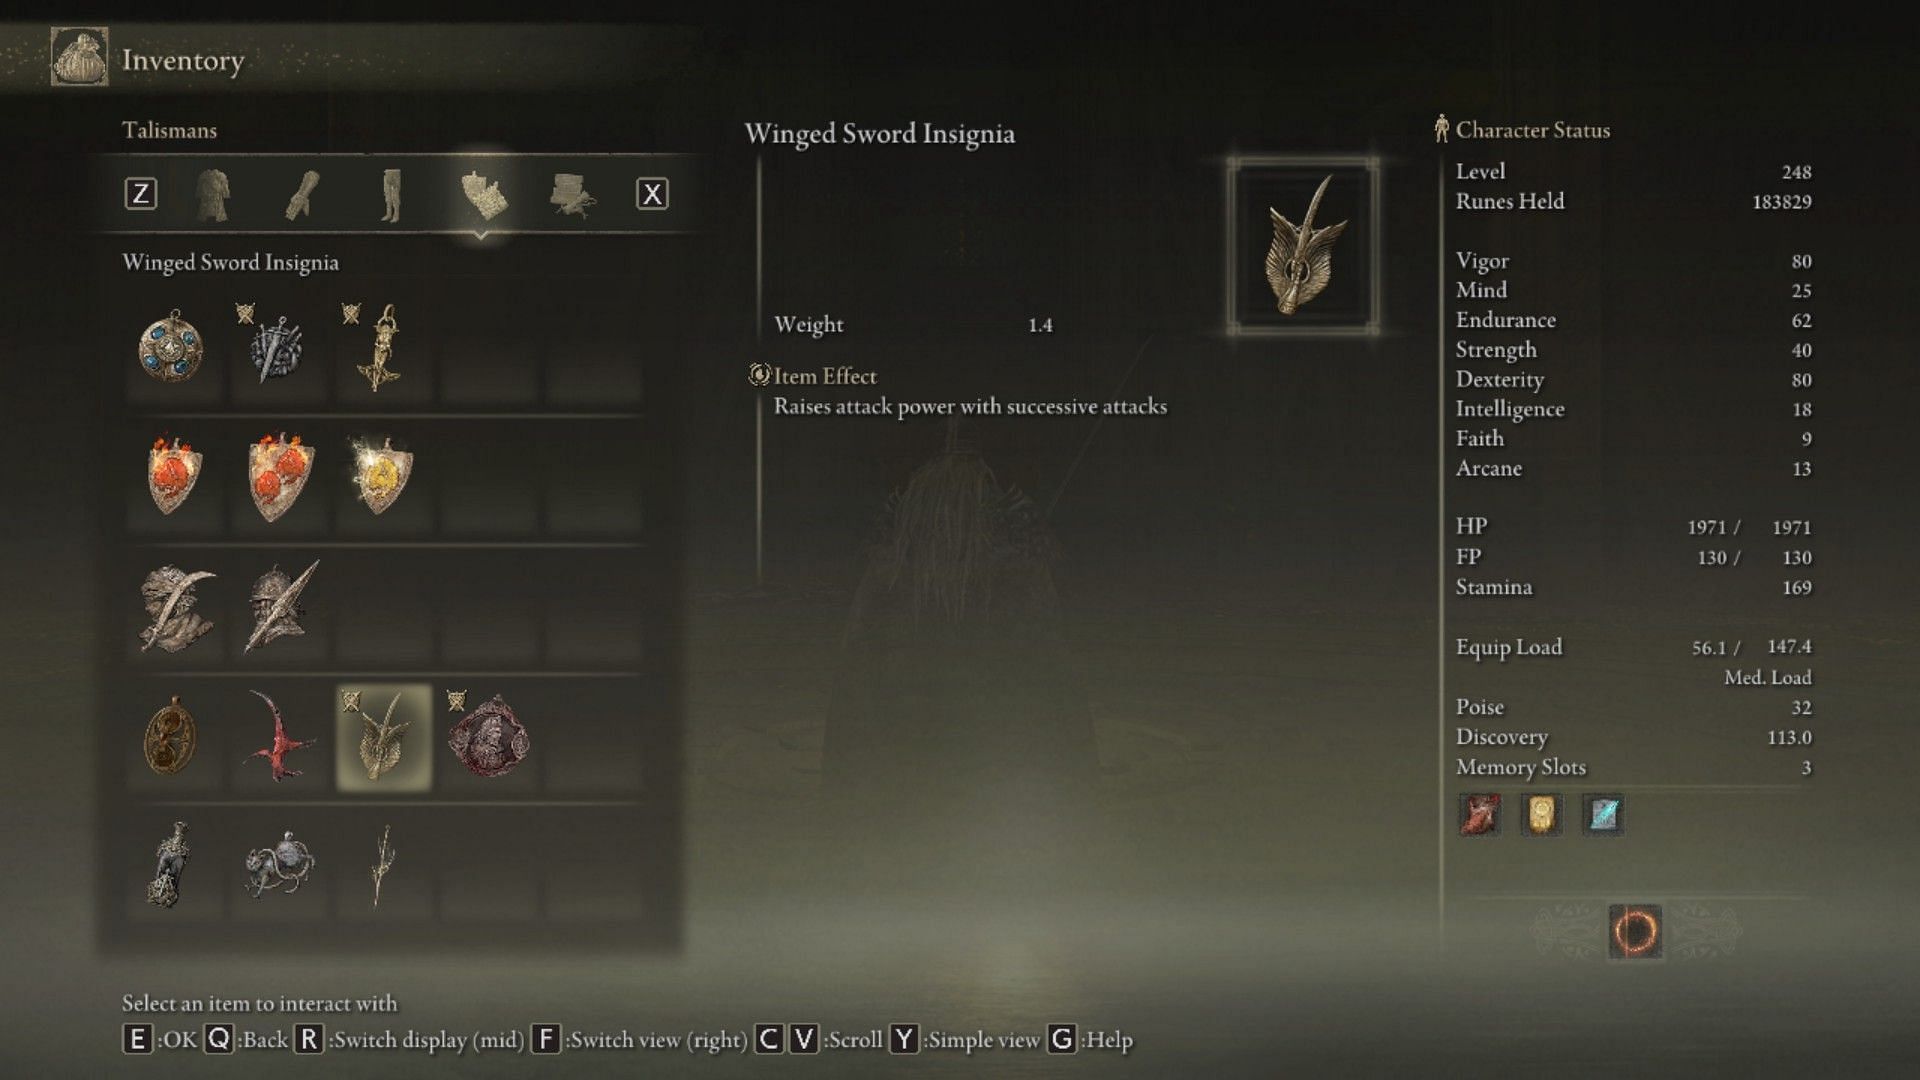 Uchigatana and dagger users will find Winged Sword Insignia extremely useful (Image via Elden Ring)